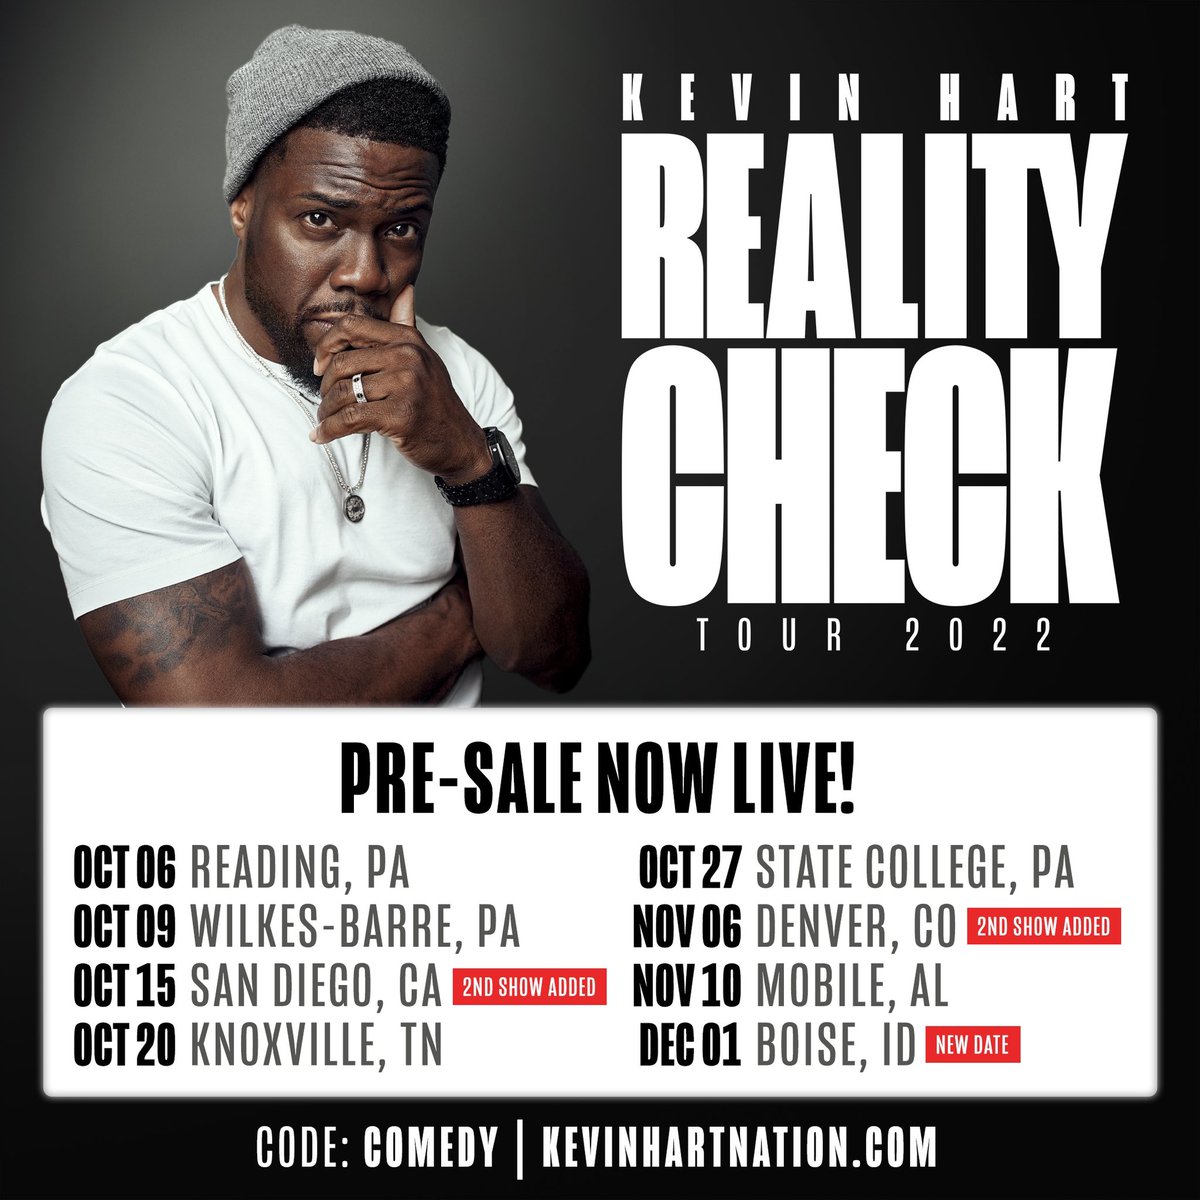 Pre-sale is now LIVE with code COMEDY for added tour dates! Get your tickets now before Friday’s general on sale at KEVINHARTNATION.COM! #RealityCheck #ComedicRockStarShit